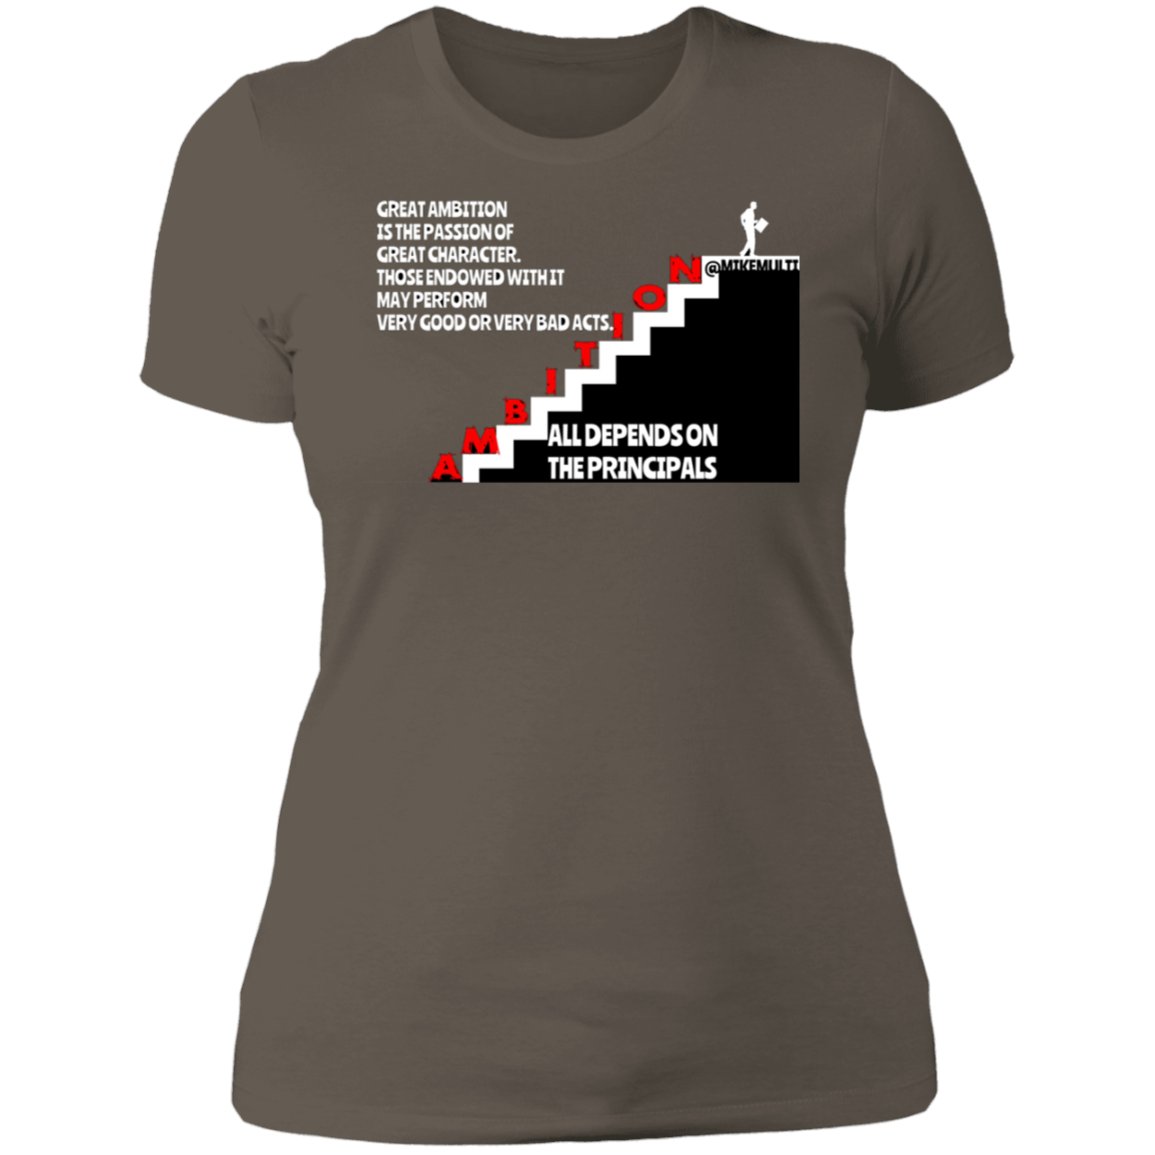 Ambition Ladies T-Shirt Clothing – Multi Clothing Brand L L C®
multiclothingbrand.com/products/ambit…
#clothingbrand #clothingline #clothingstore #clothingcompany #sustainable #affordable #premium #clothings #ethical #streetclothing #streetwear #multi #ambition